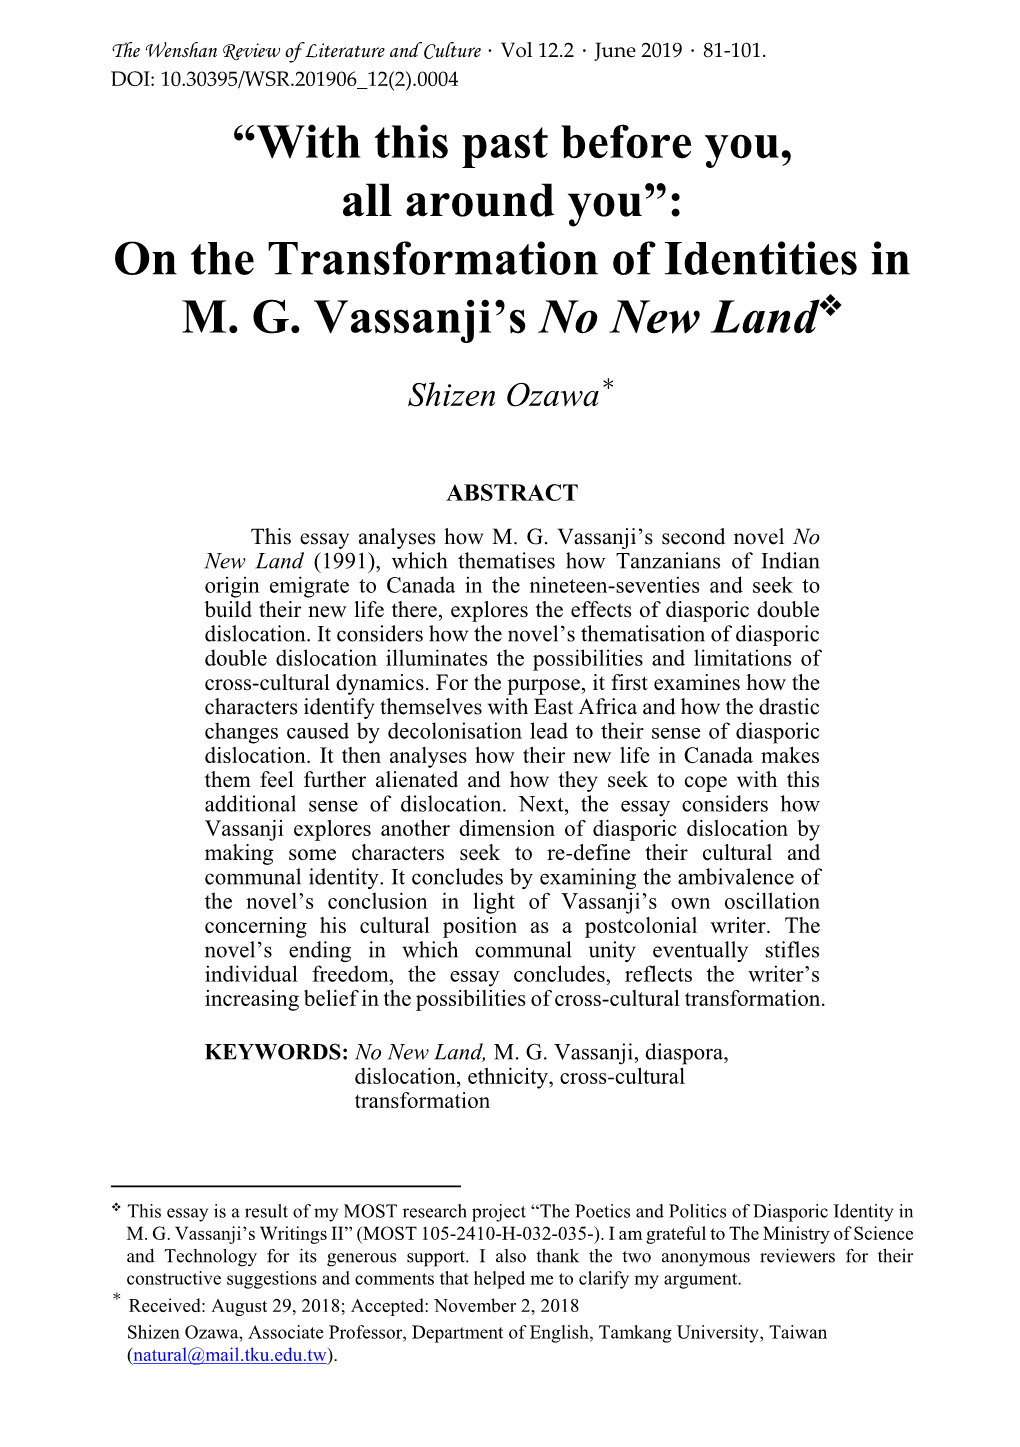 “With This Past Before You, All Around You”: on the Transformation of Identities in M